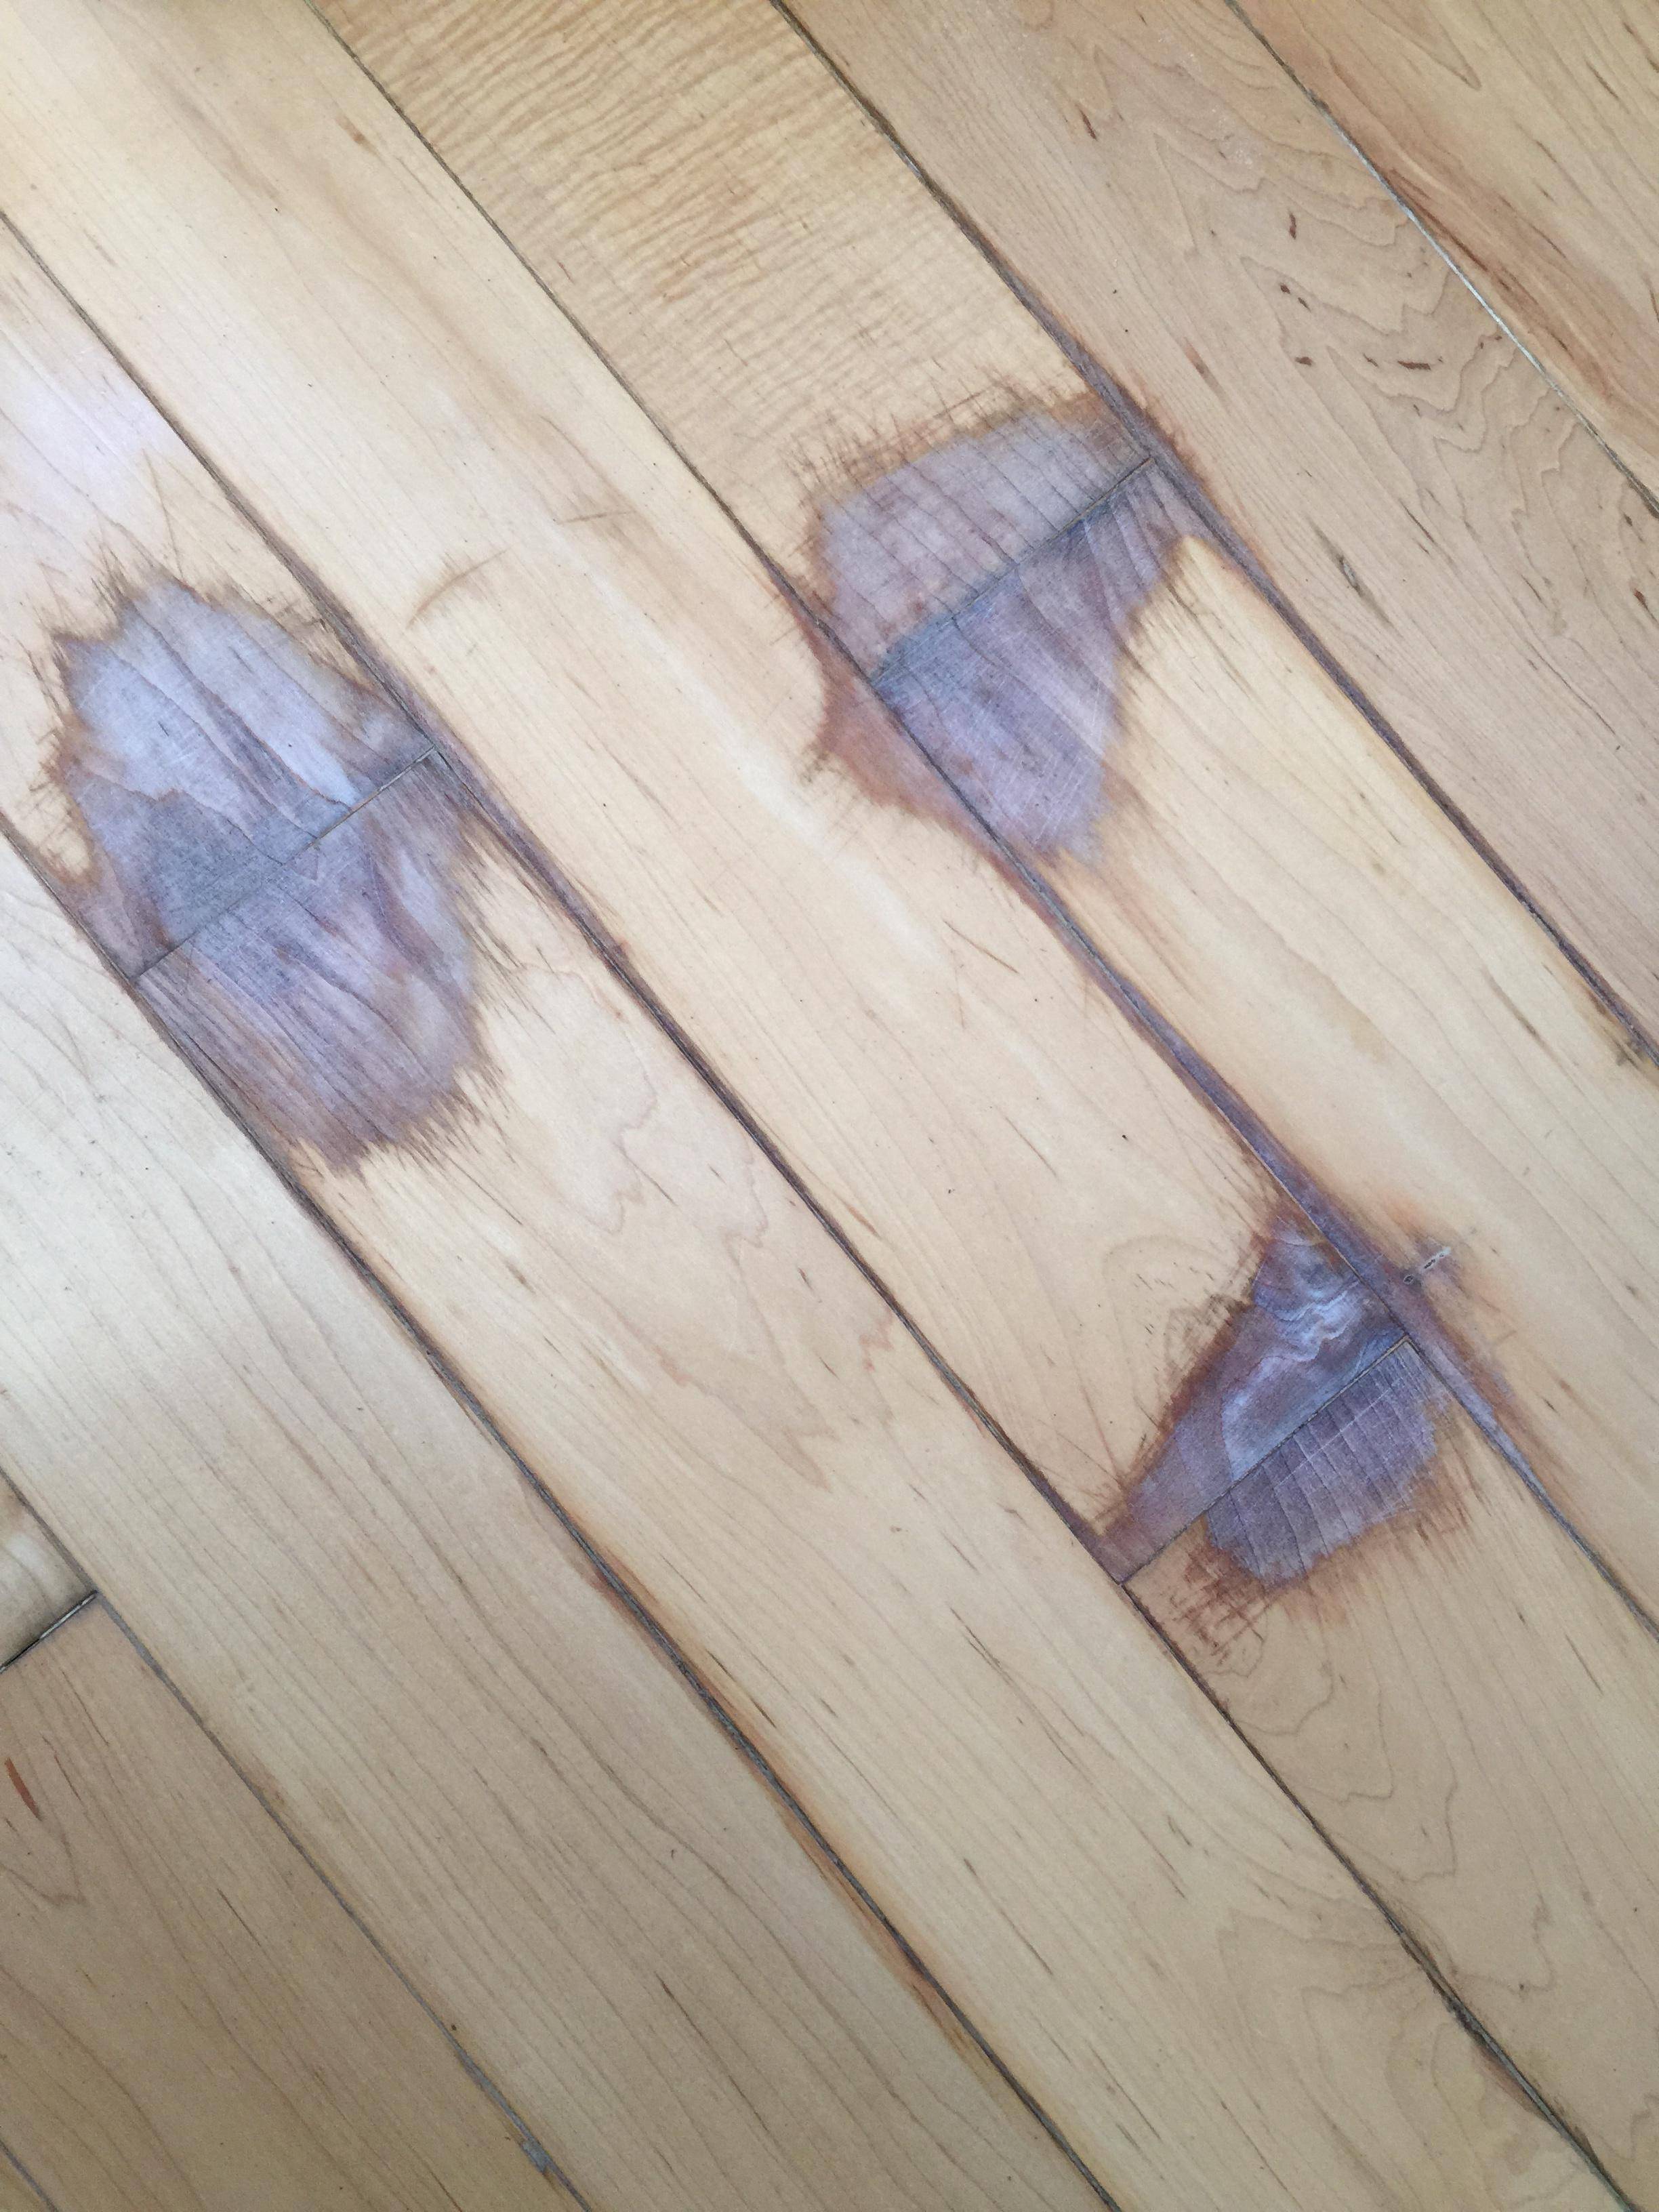 repair - How can I cover up wood floor stain spill damage? - Home ...